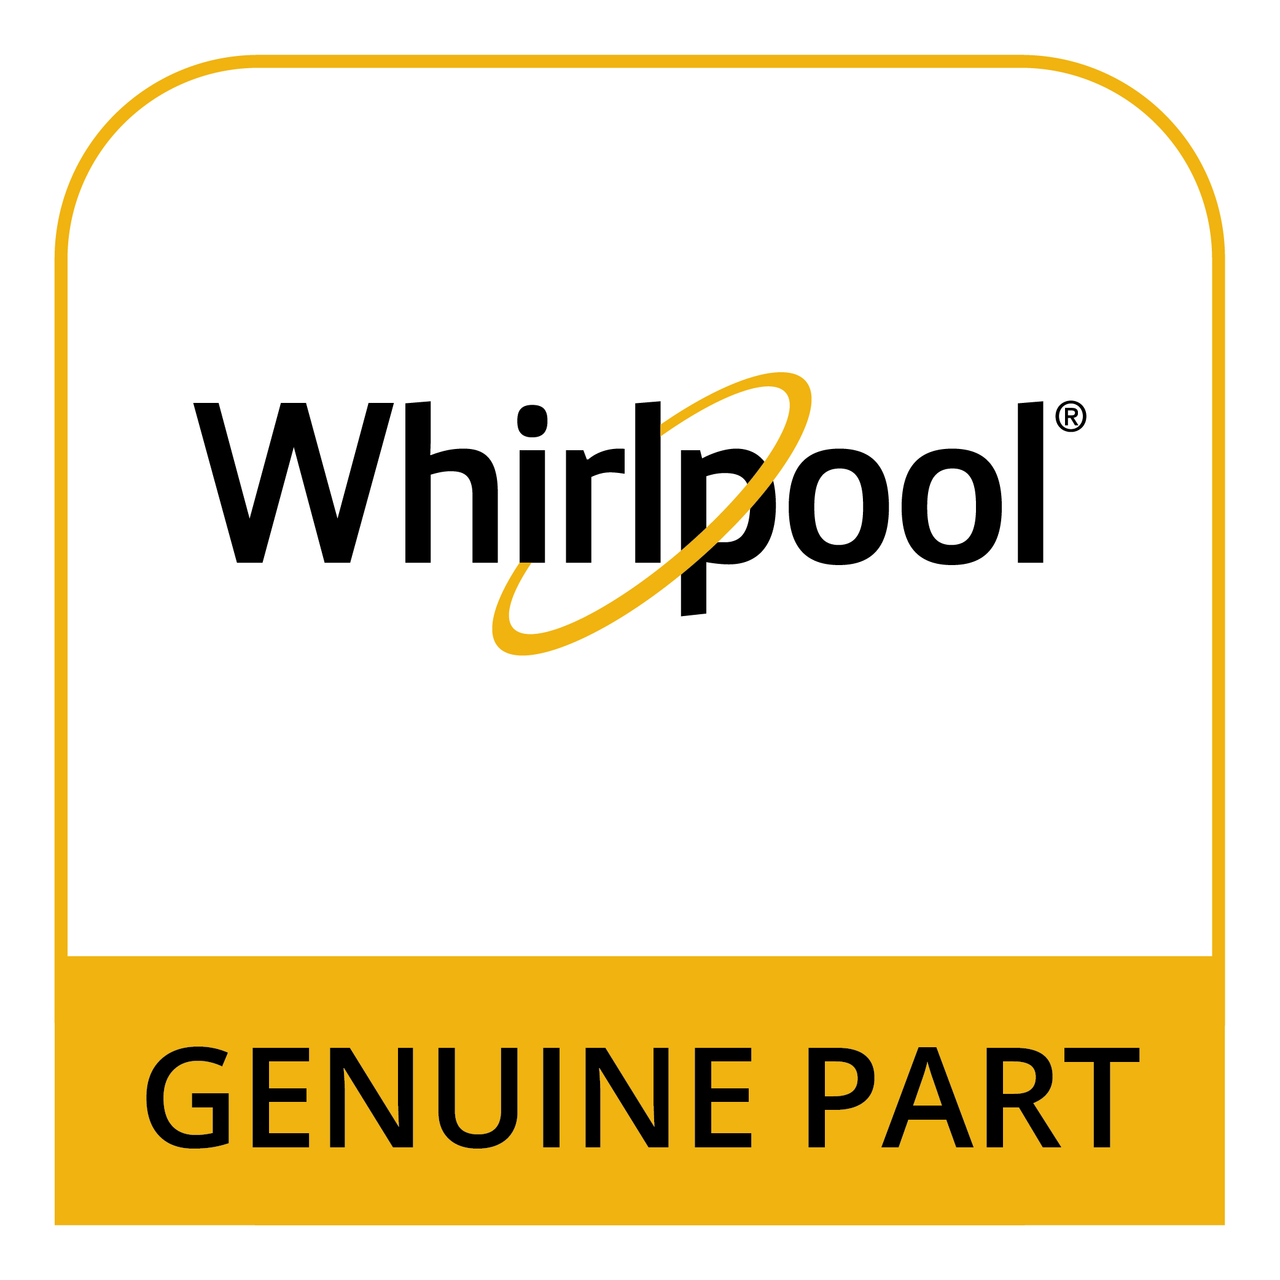 Whirlpool WP3363394 - Top Load Washer Drain Pump - Genuine Part